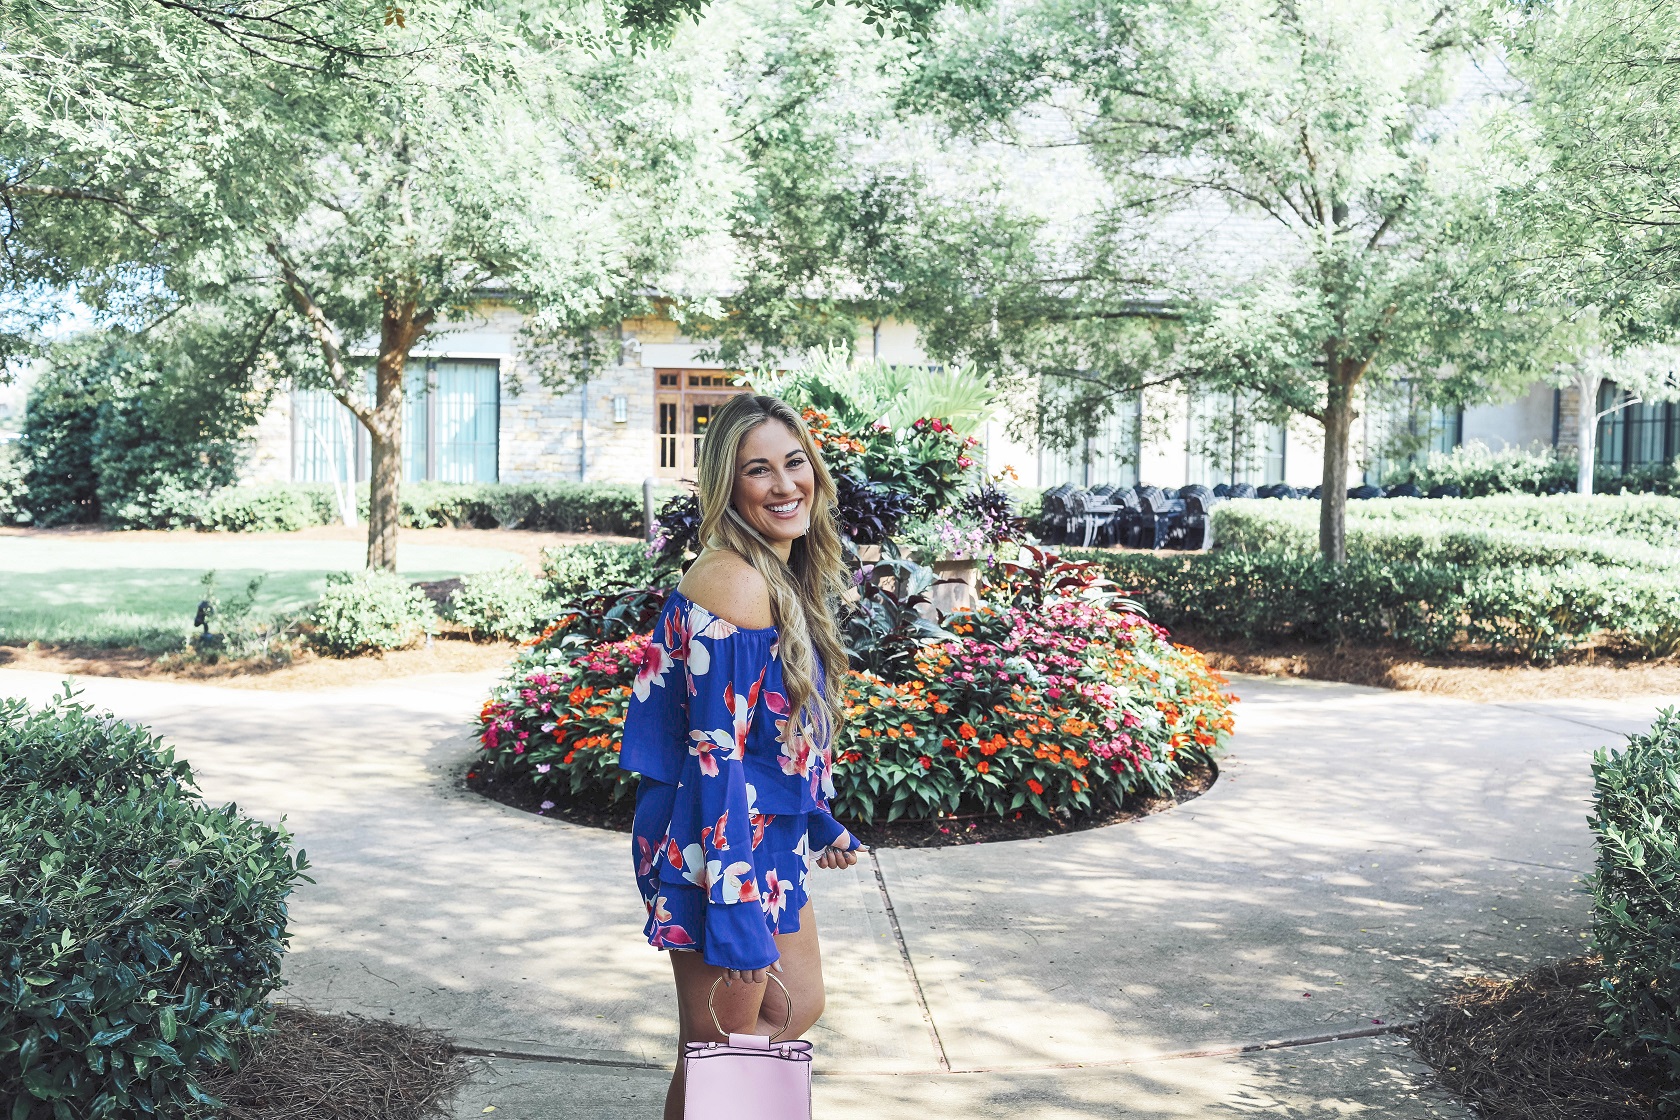 Super Cute Off the Shoulder Floral Romper from the Pink Lily Boutique featured by popular fashion blogger, Walking in Memphis in High Heels